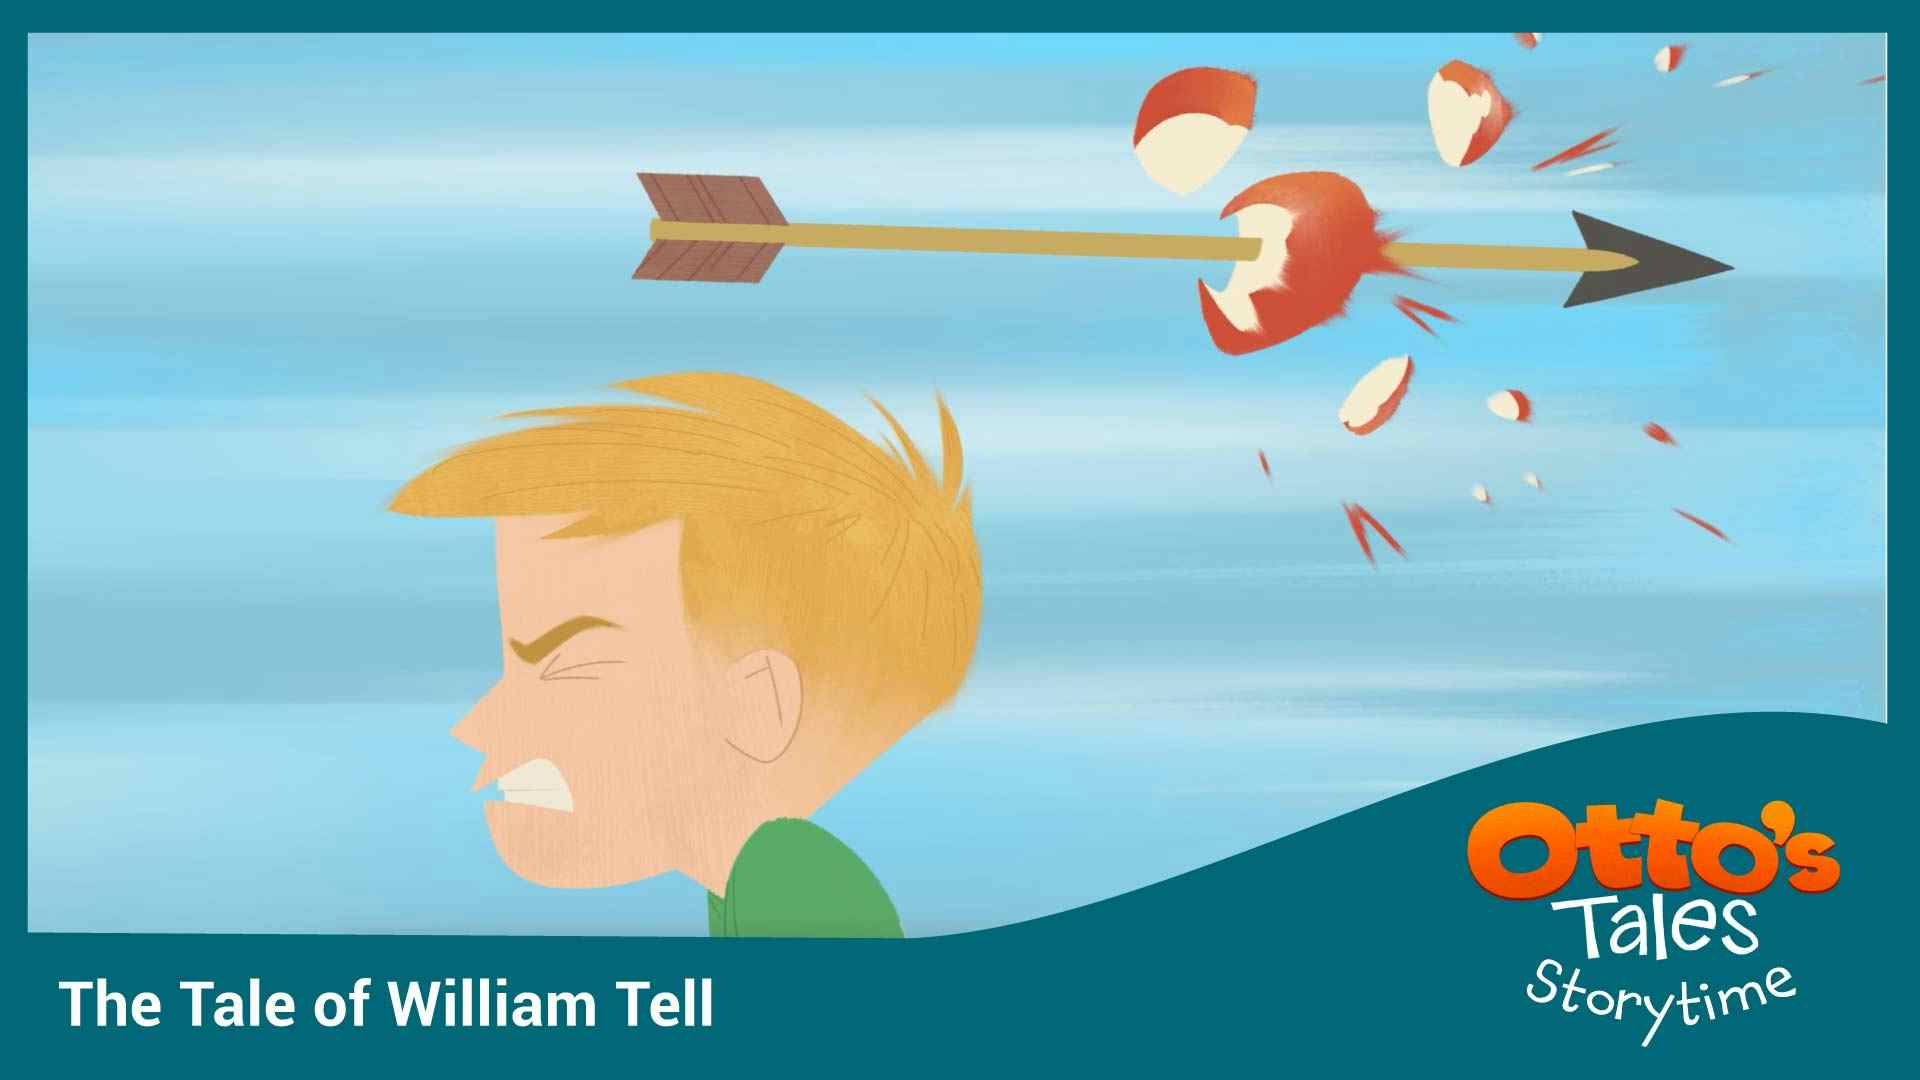 The Tale of William Tell